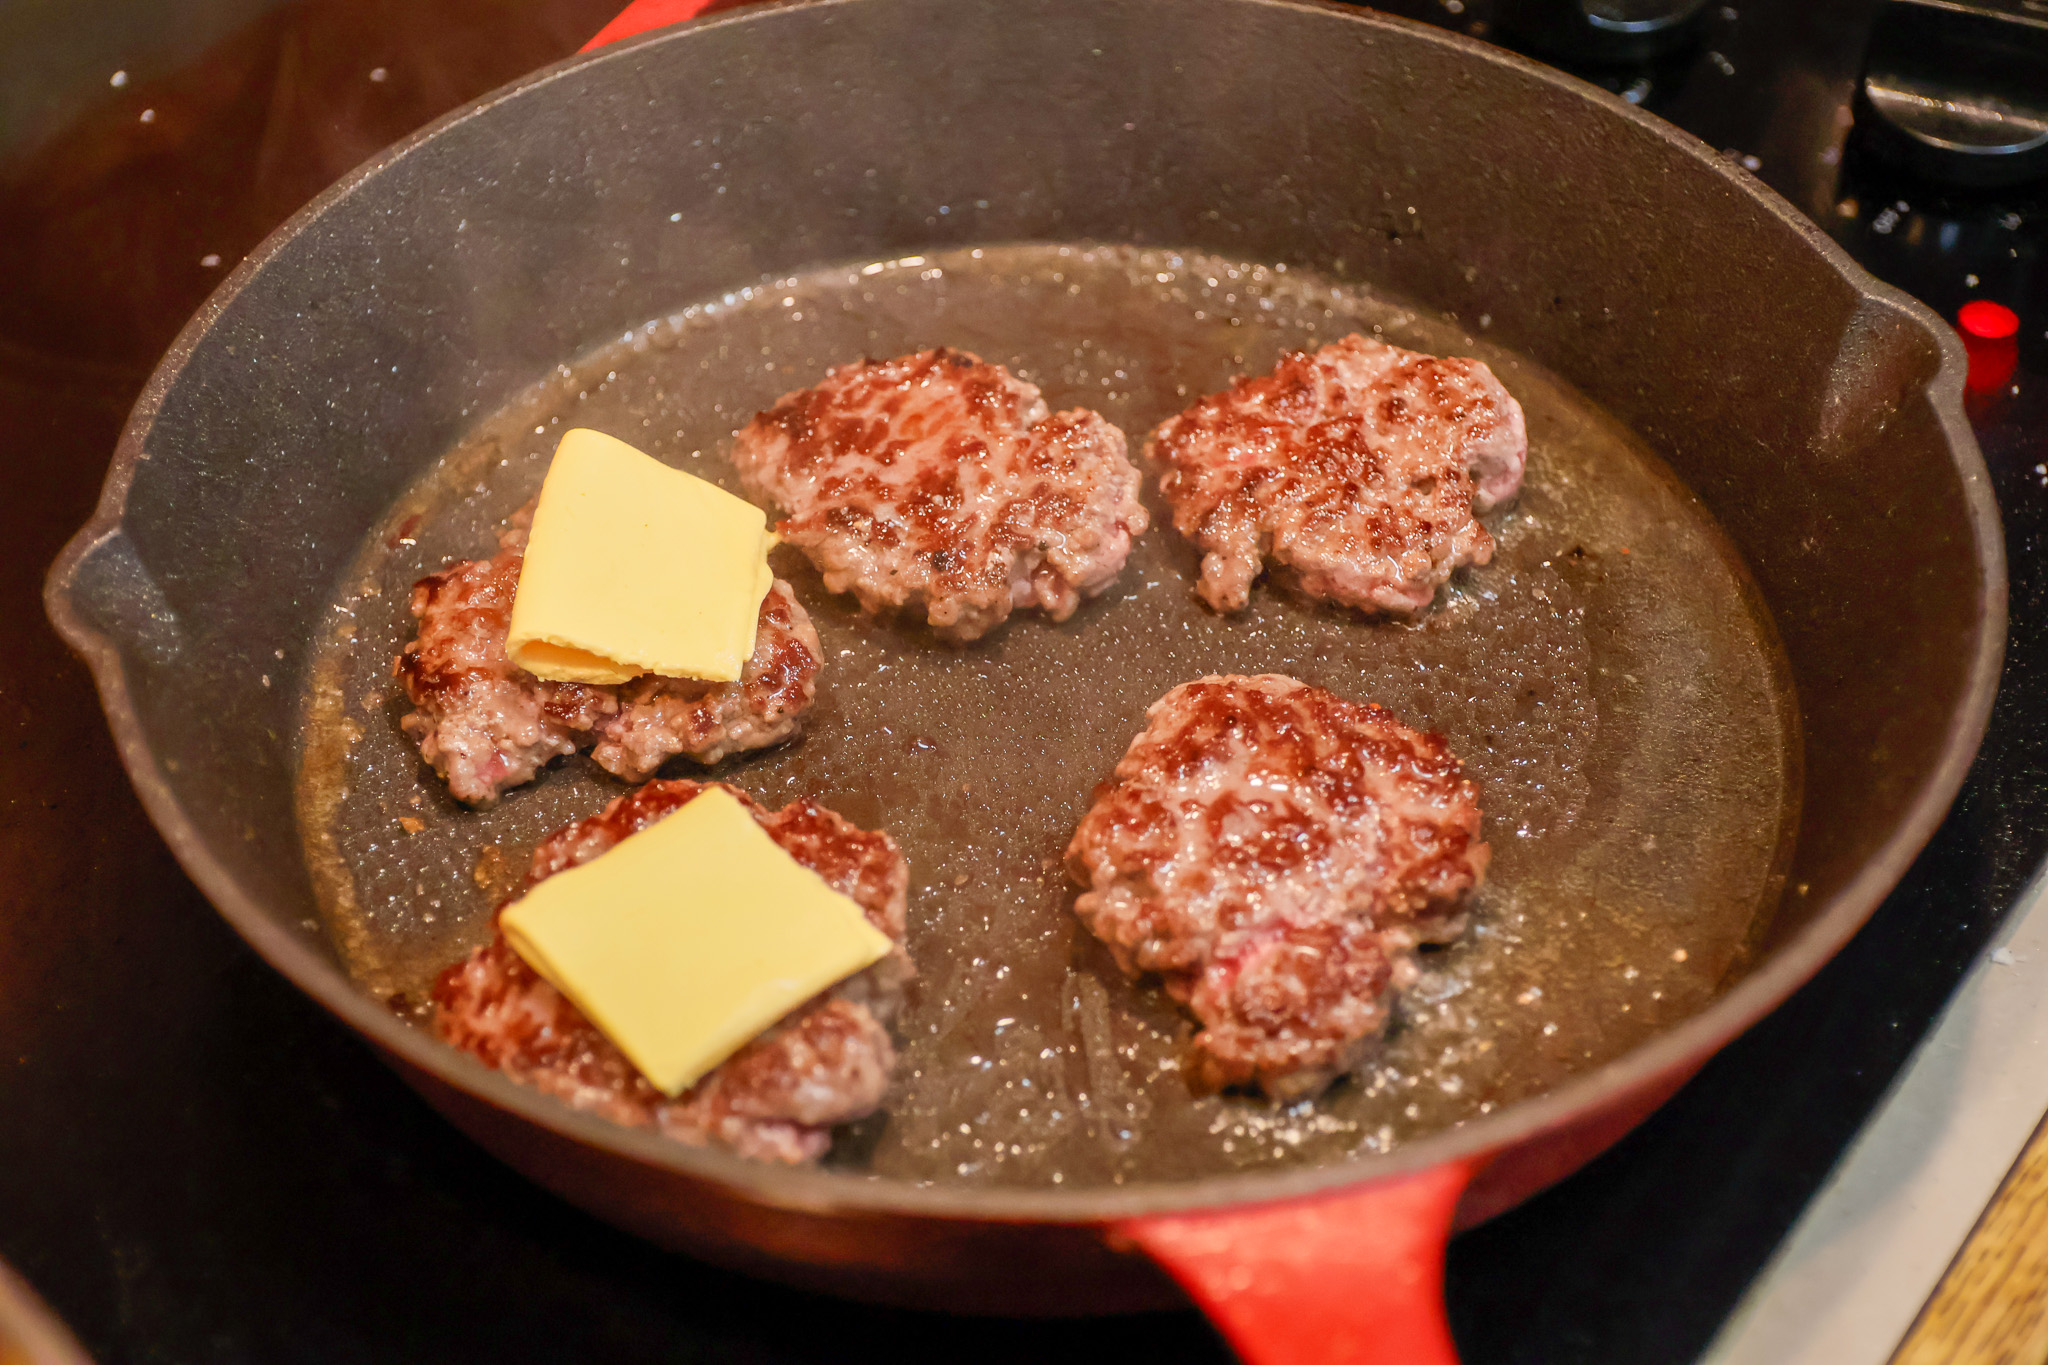 Once cooked through on one side, which should only take a minute or two considering the small size of the burgers, quickly flip over and adorn the patties with American cheese.
Sal DiMAggio | The Montclarion